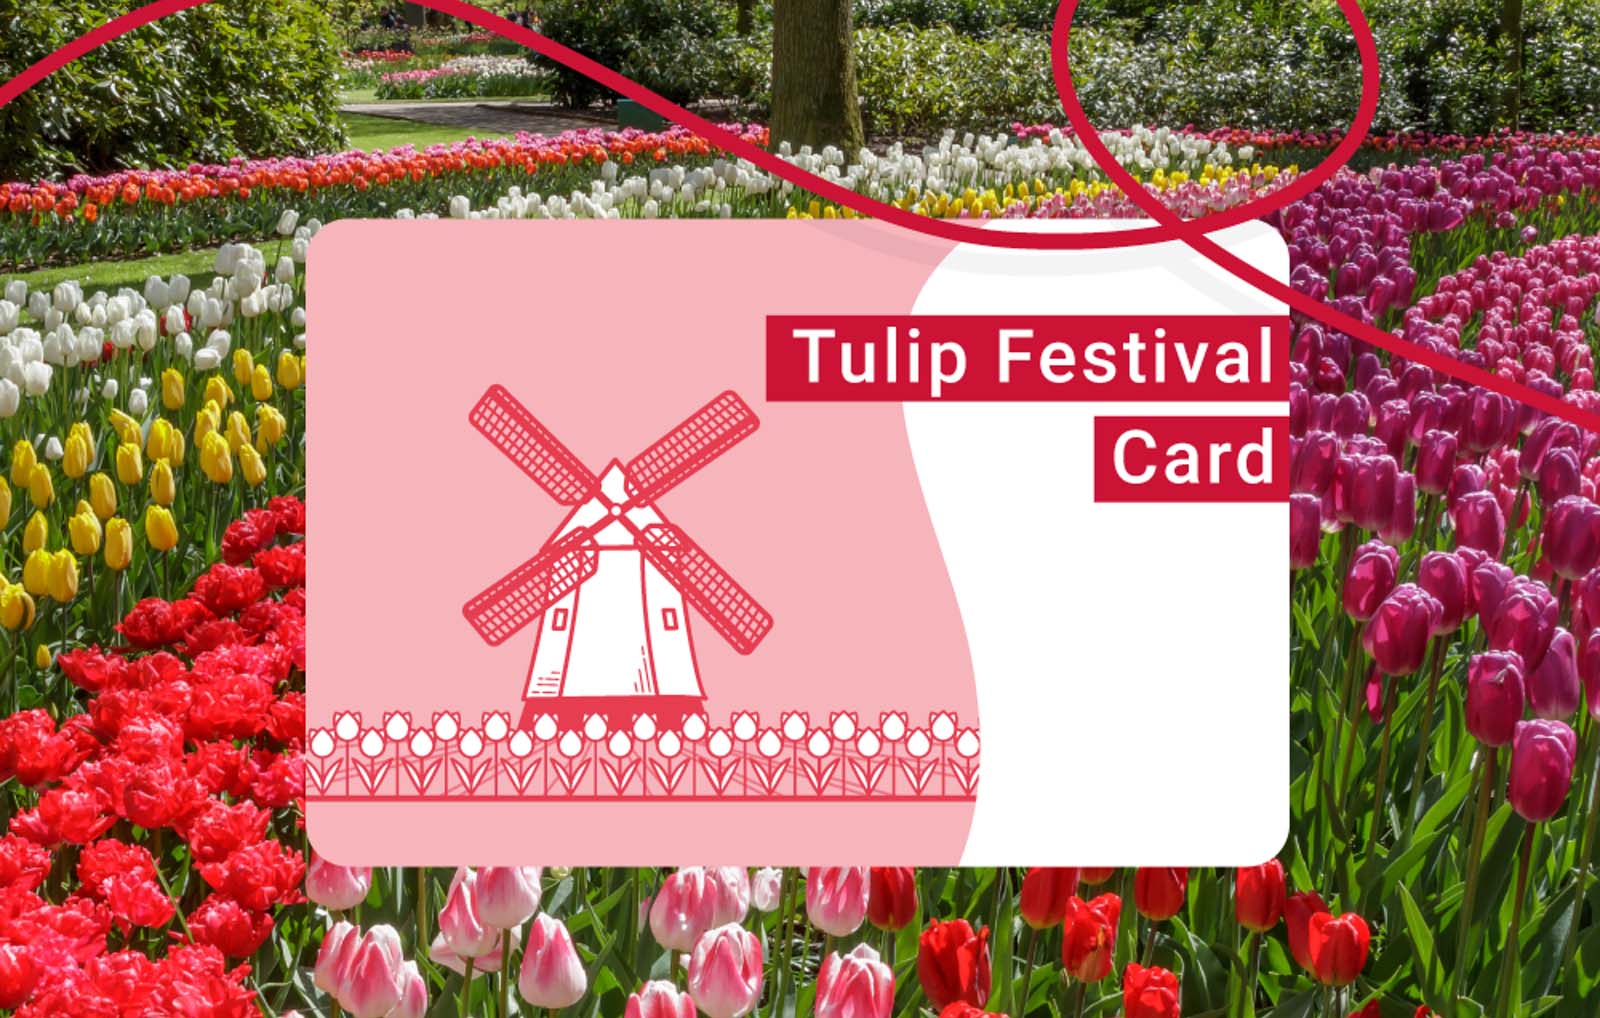 Visit the tulips in Holland with the Tulip Festival Card